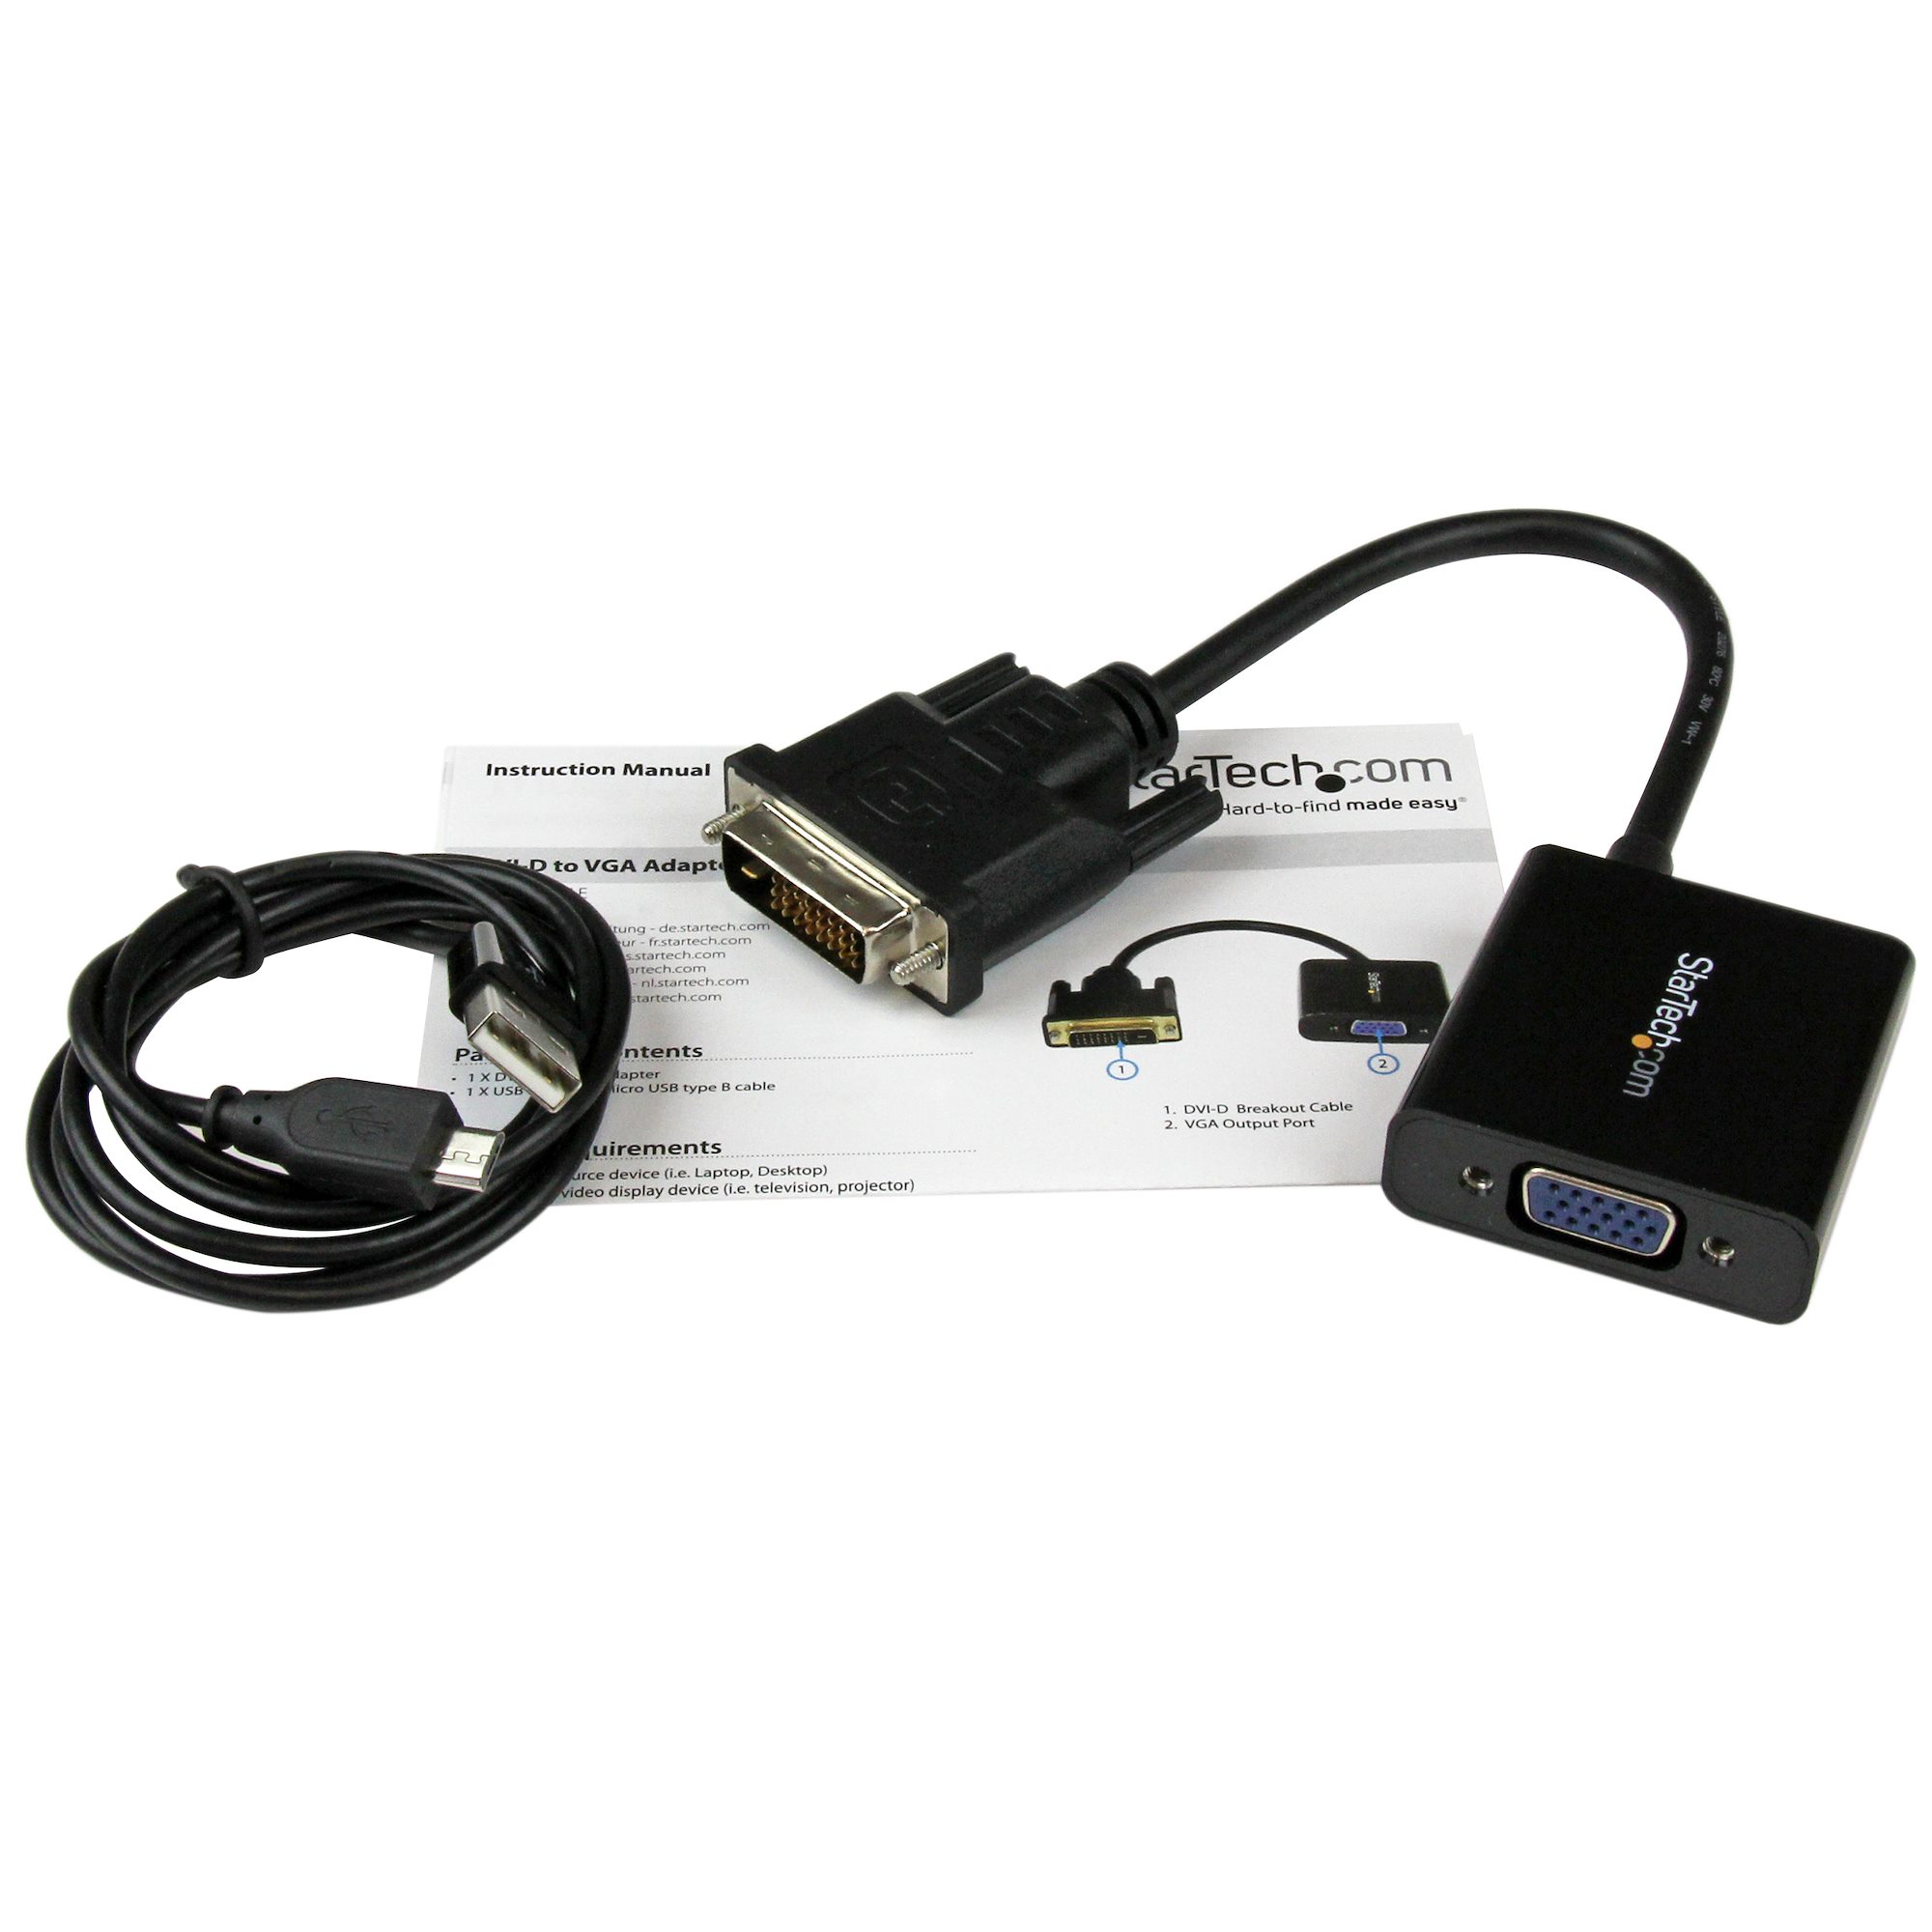 DVI-D to VGA Active Adapter Converter Cable - 1080p